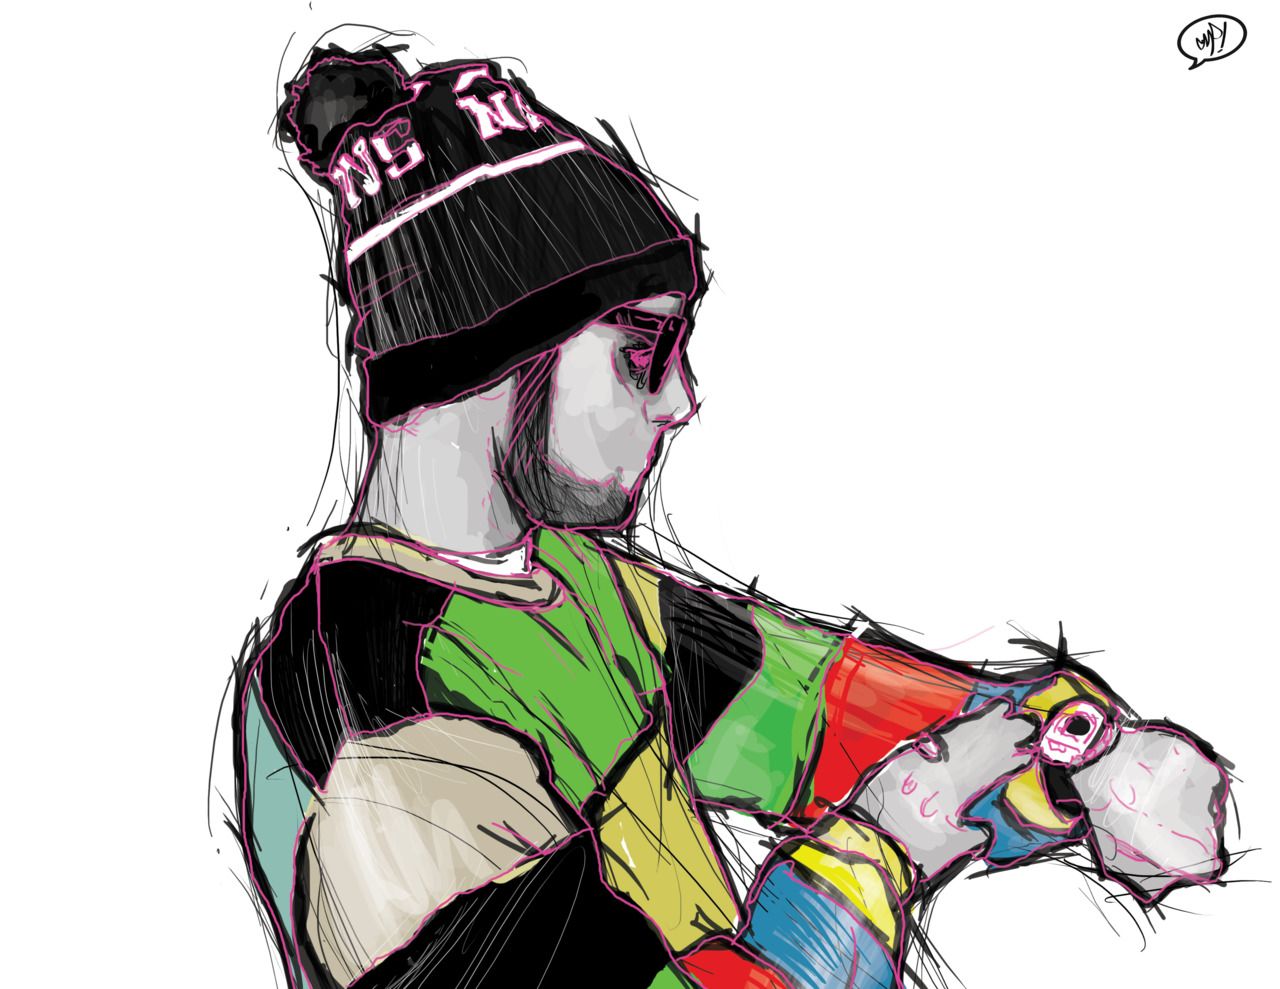 Mac Miller Laptop wallpaper found the art on this sub  rMacMiller